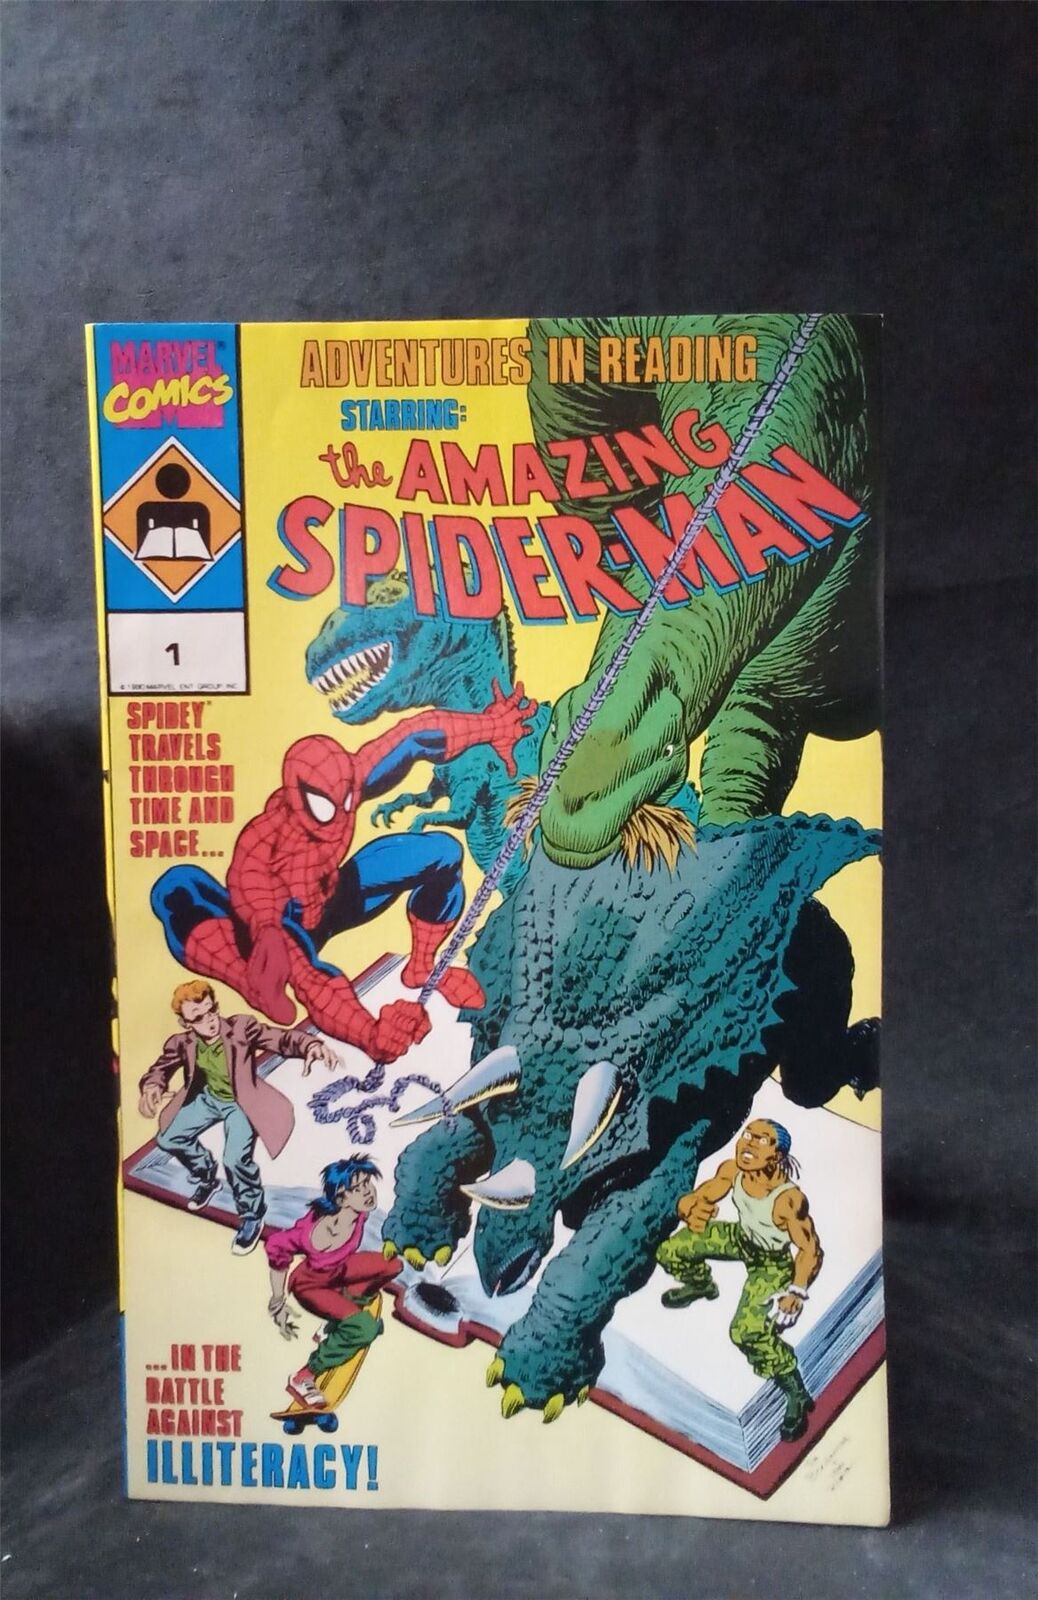 Adventures in Reading Starring the Amazing Spider-Man #1 1990 Marvel Comics